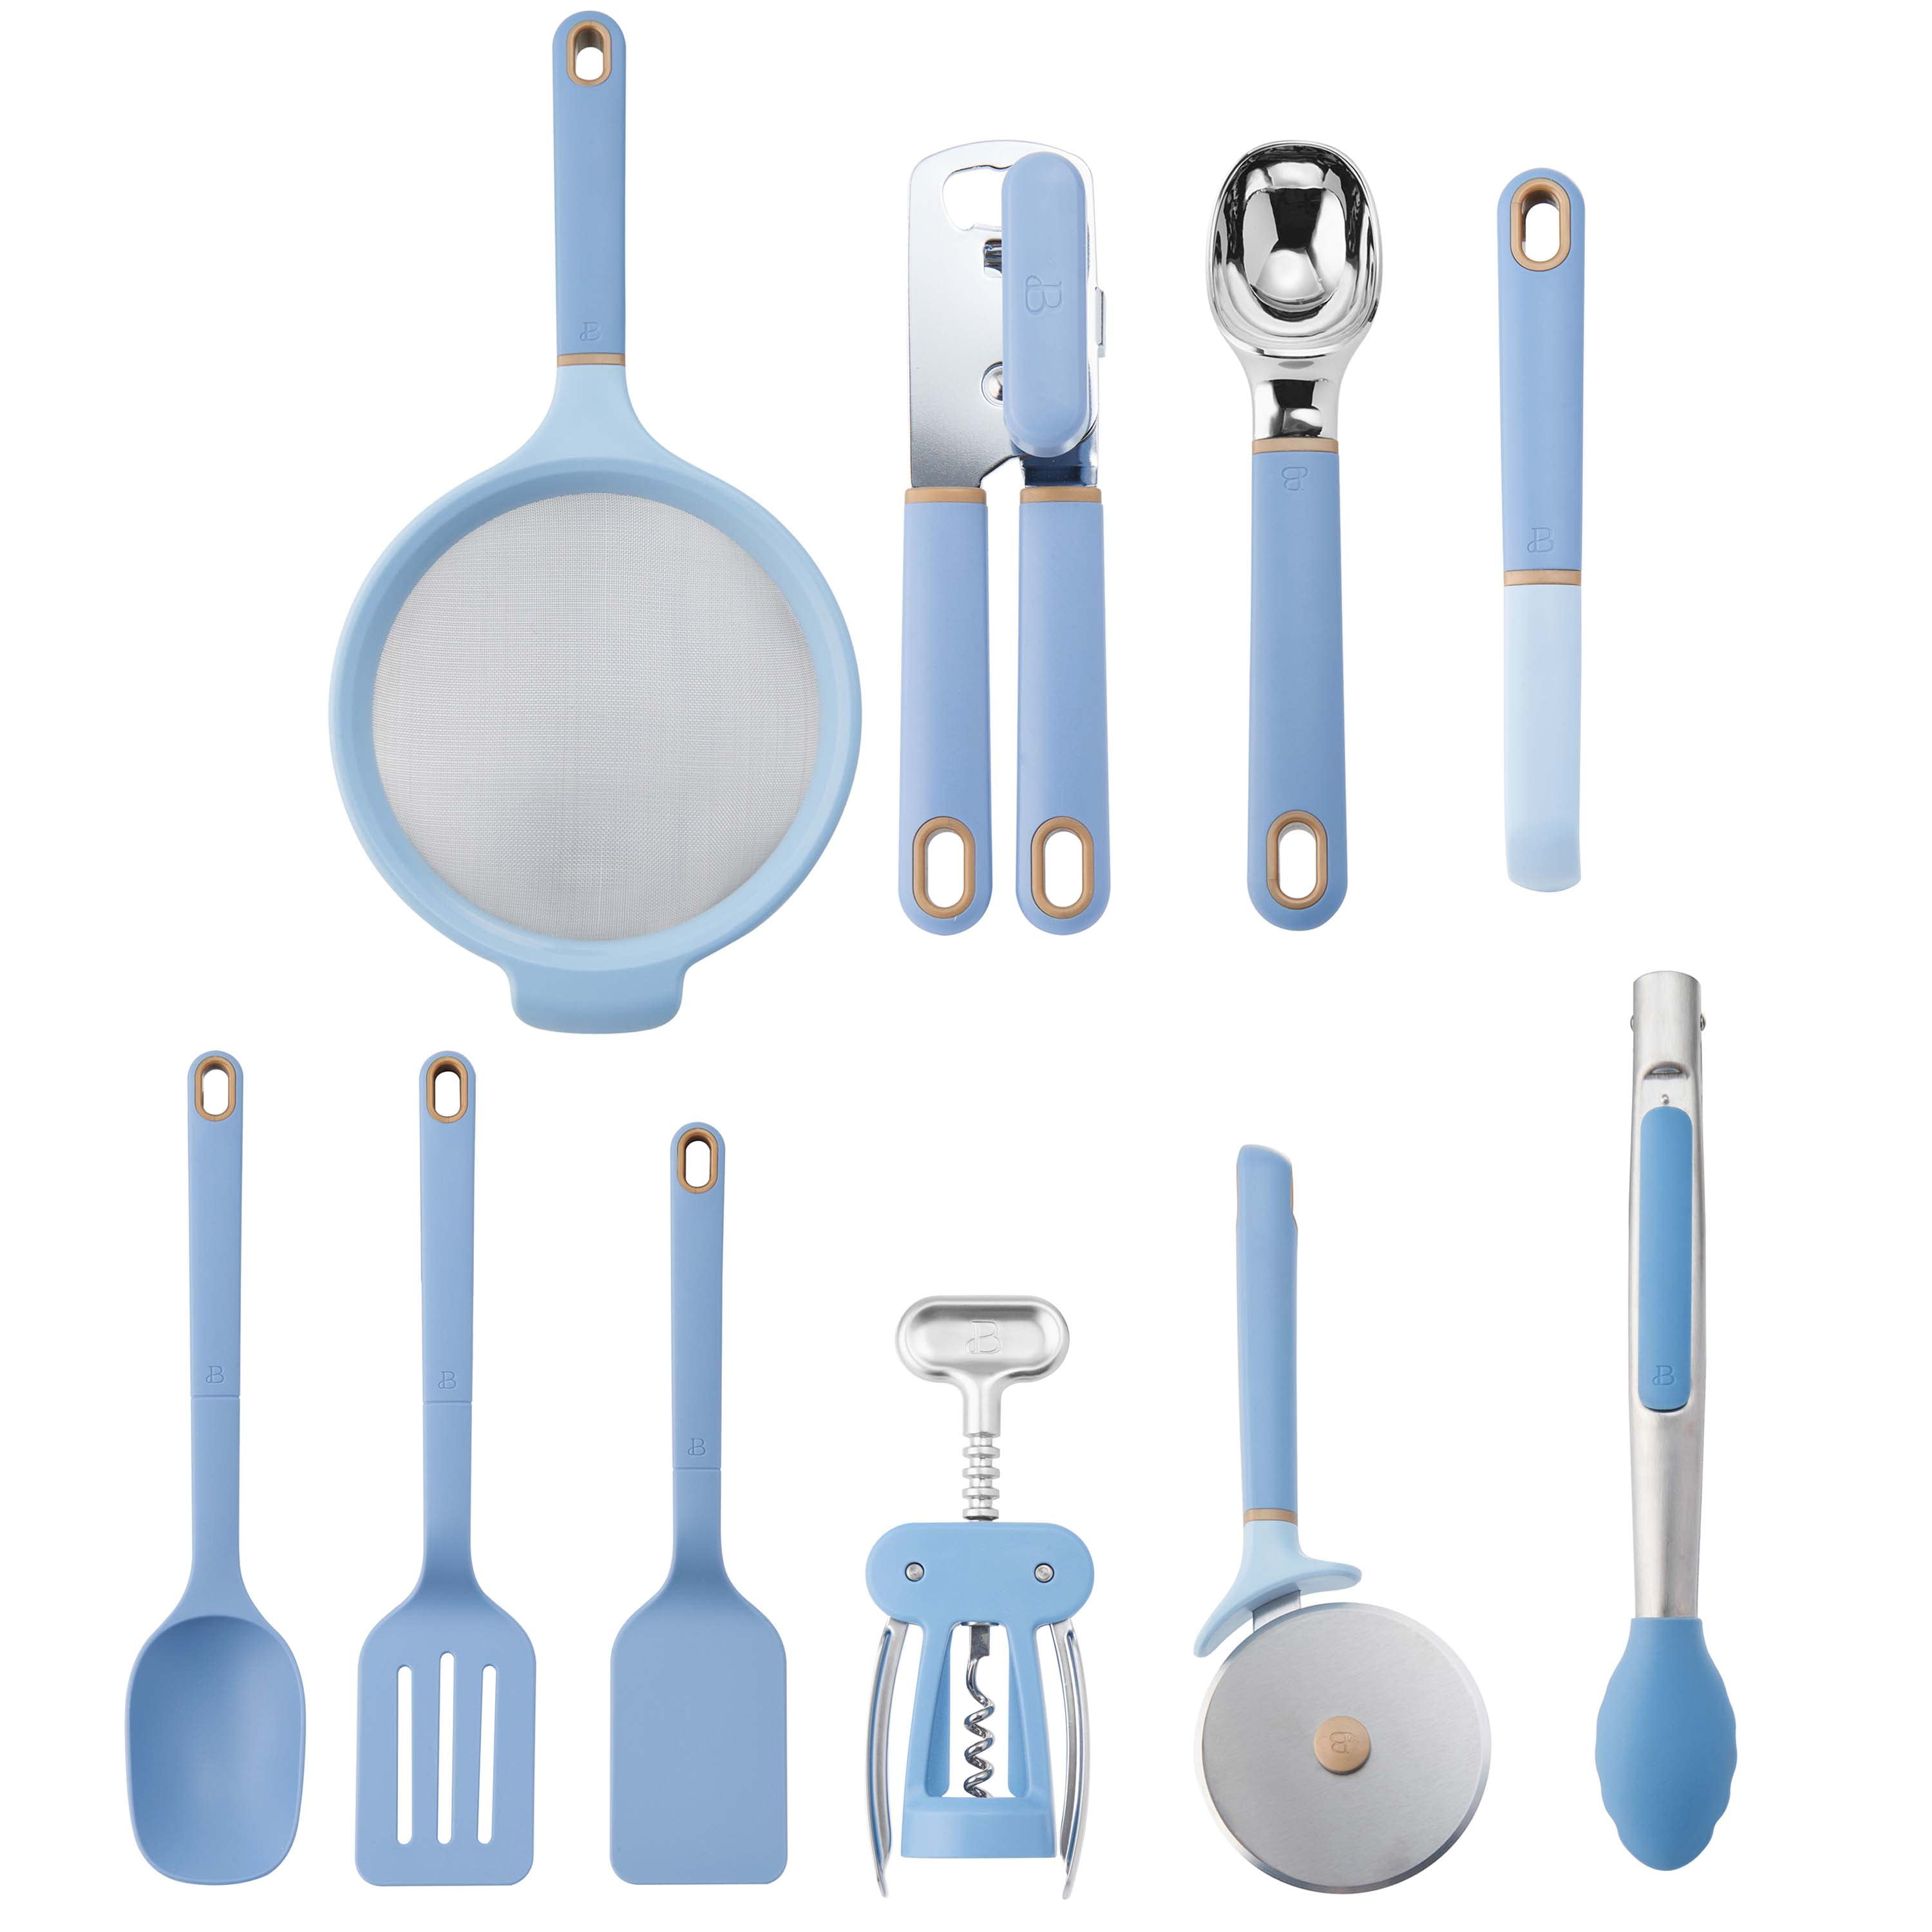 Beautiful 10-piece Tool and Gadget Set in Blue Icing by Drew Barrymore